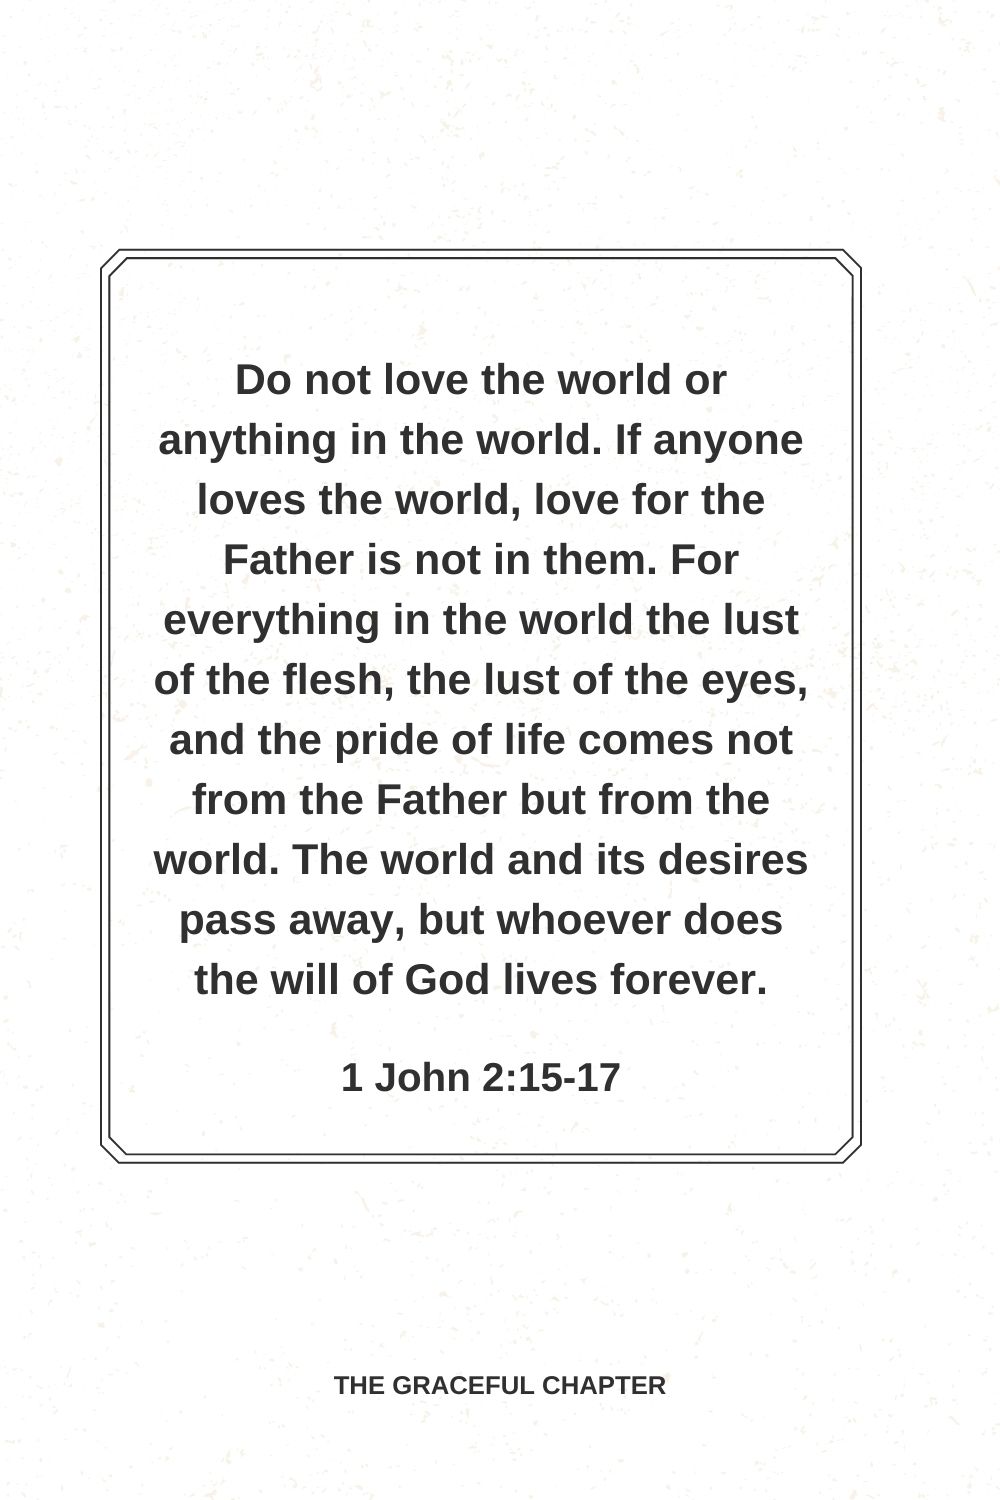 Do not love the world or anything in the world. If anyone loves the world, love for the Father is not in them. For everything in the world the lust of the flesh, the lust of the eyes, and the pride of life comes not from the Father but from the world. The world and its desires pass away, but whoever does the will of God lives forever. 1 John 2:15-17